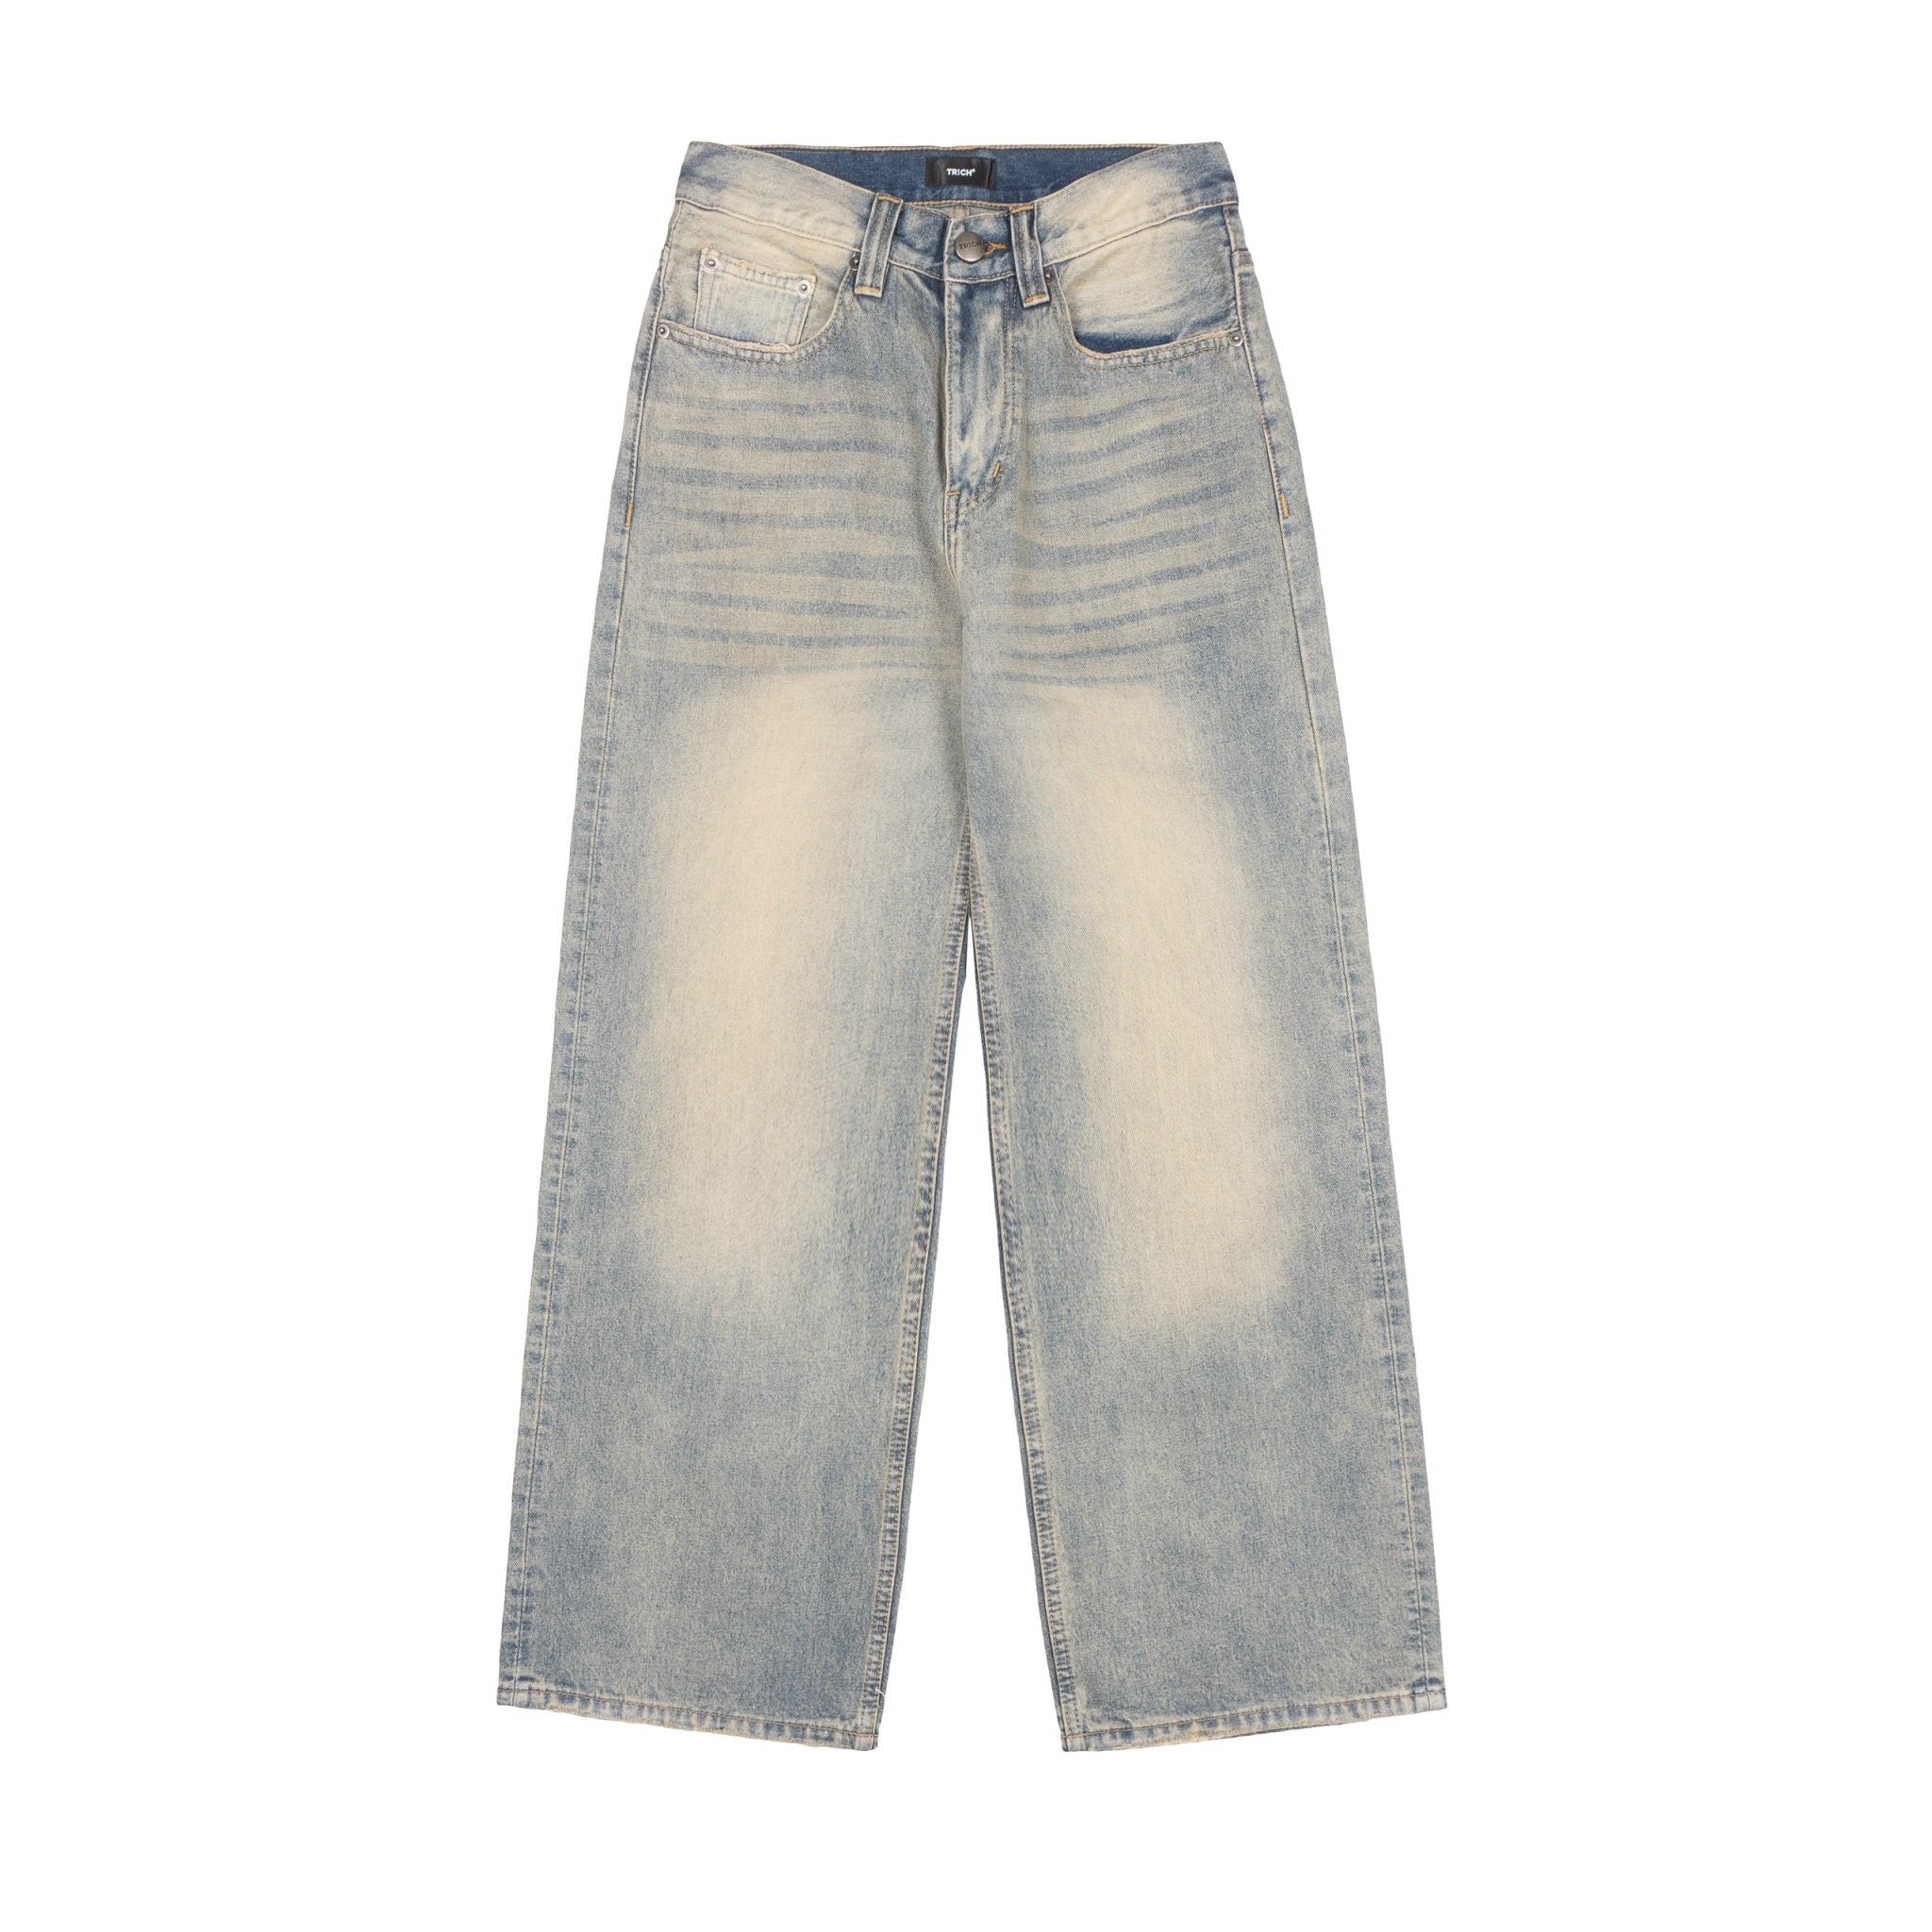 AYAY low-rise jeans